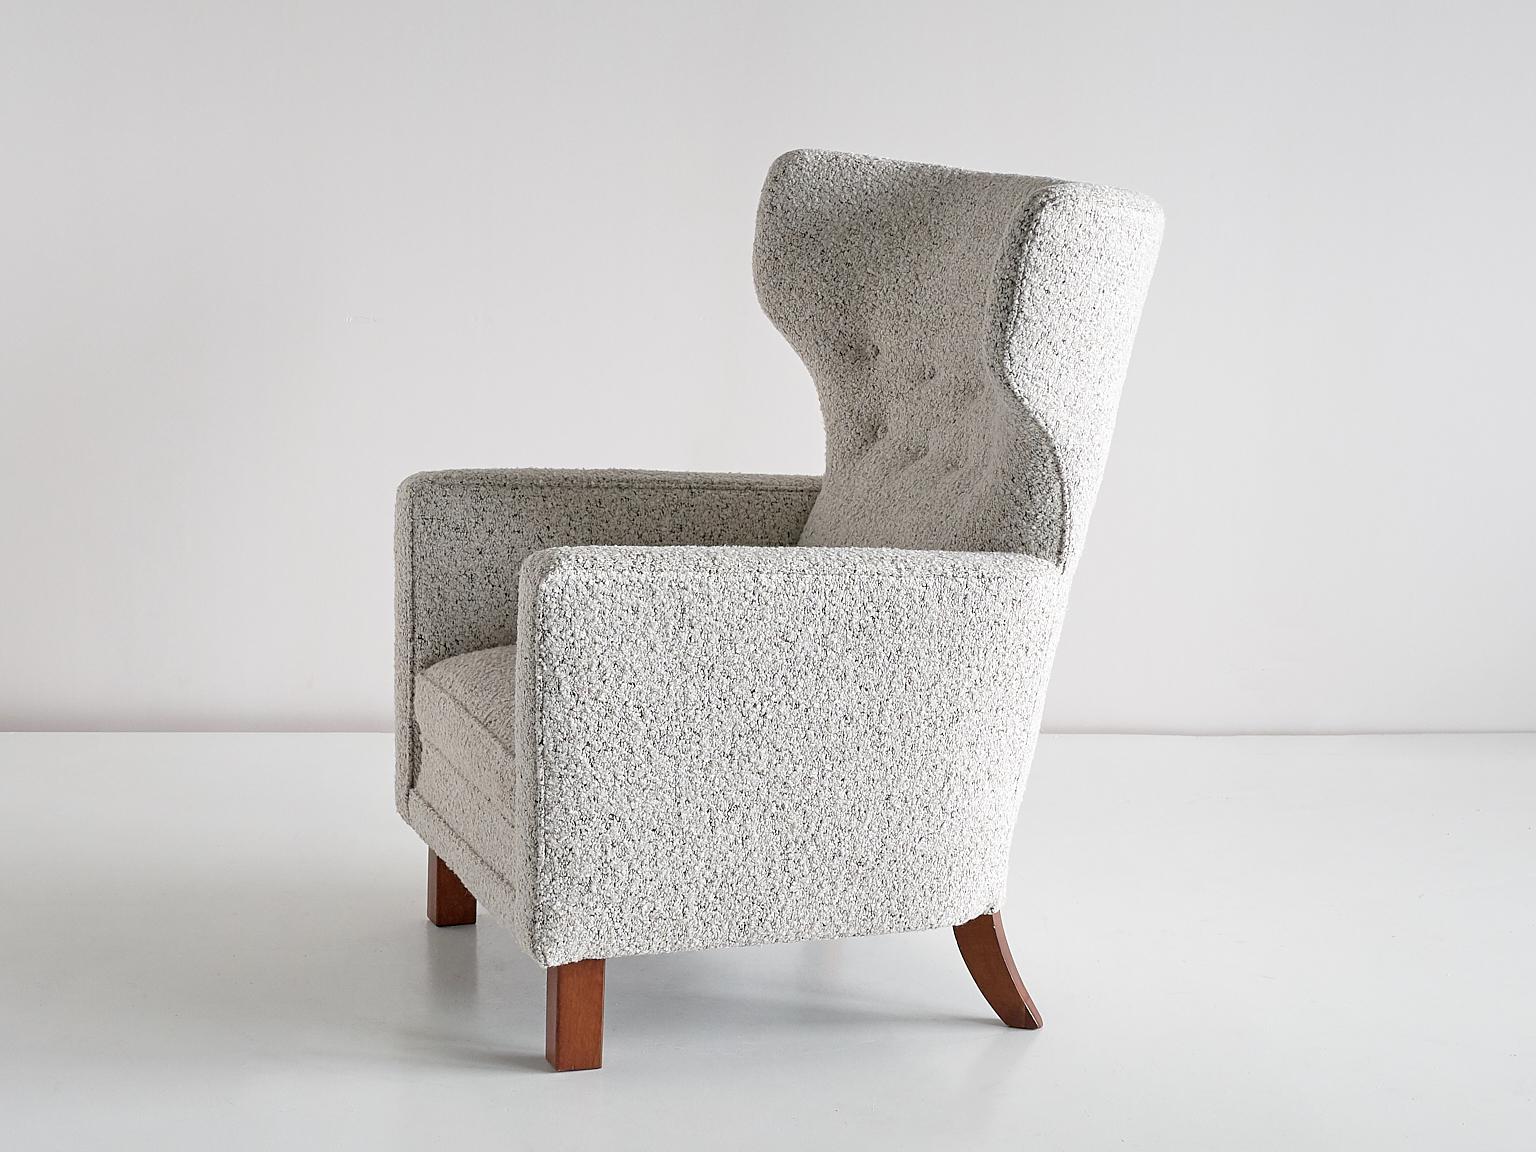 Paul Boman Wingback Chair in Pearl Bouclé Fabric and Beech, Finland, 1940s For Sale 4